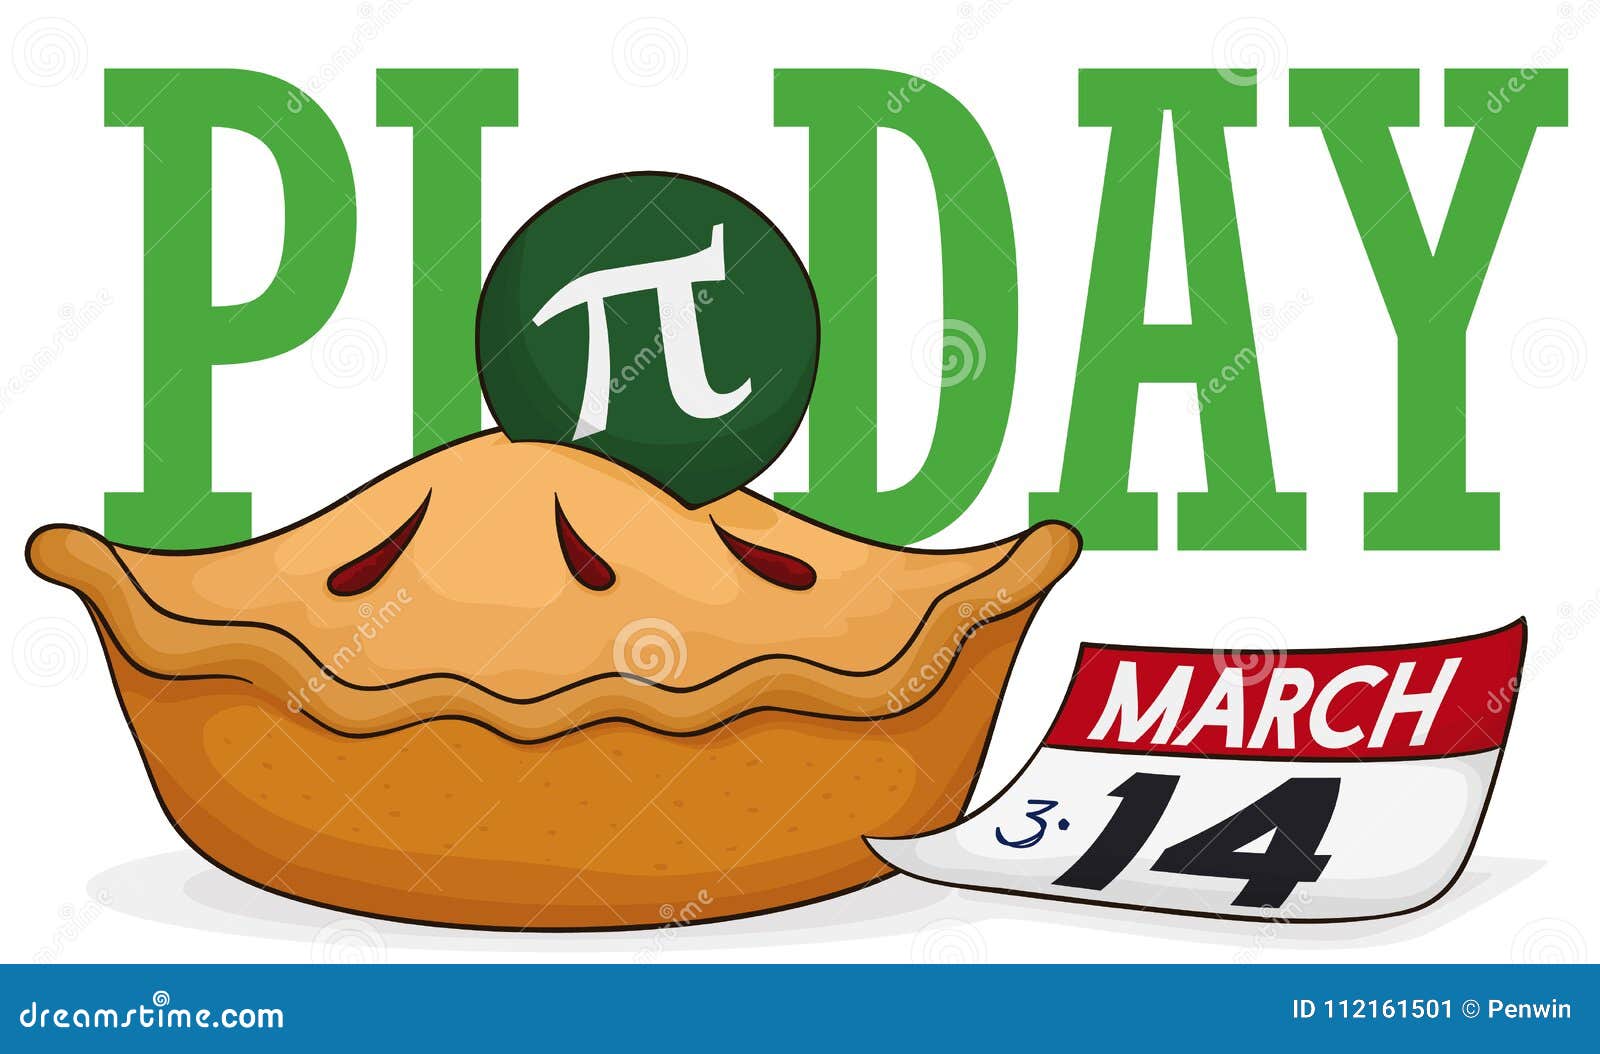 Delicious Pie with Loose-leaf Calendar to Celebrate Pi Day, Vector Illustration. Banner with a delicious pie, a pin with pi symbol inside a and loose-leaf calendar promoting 14th March: Pi Day celebration.